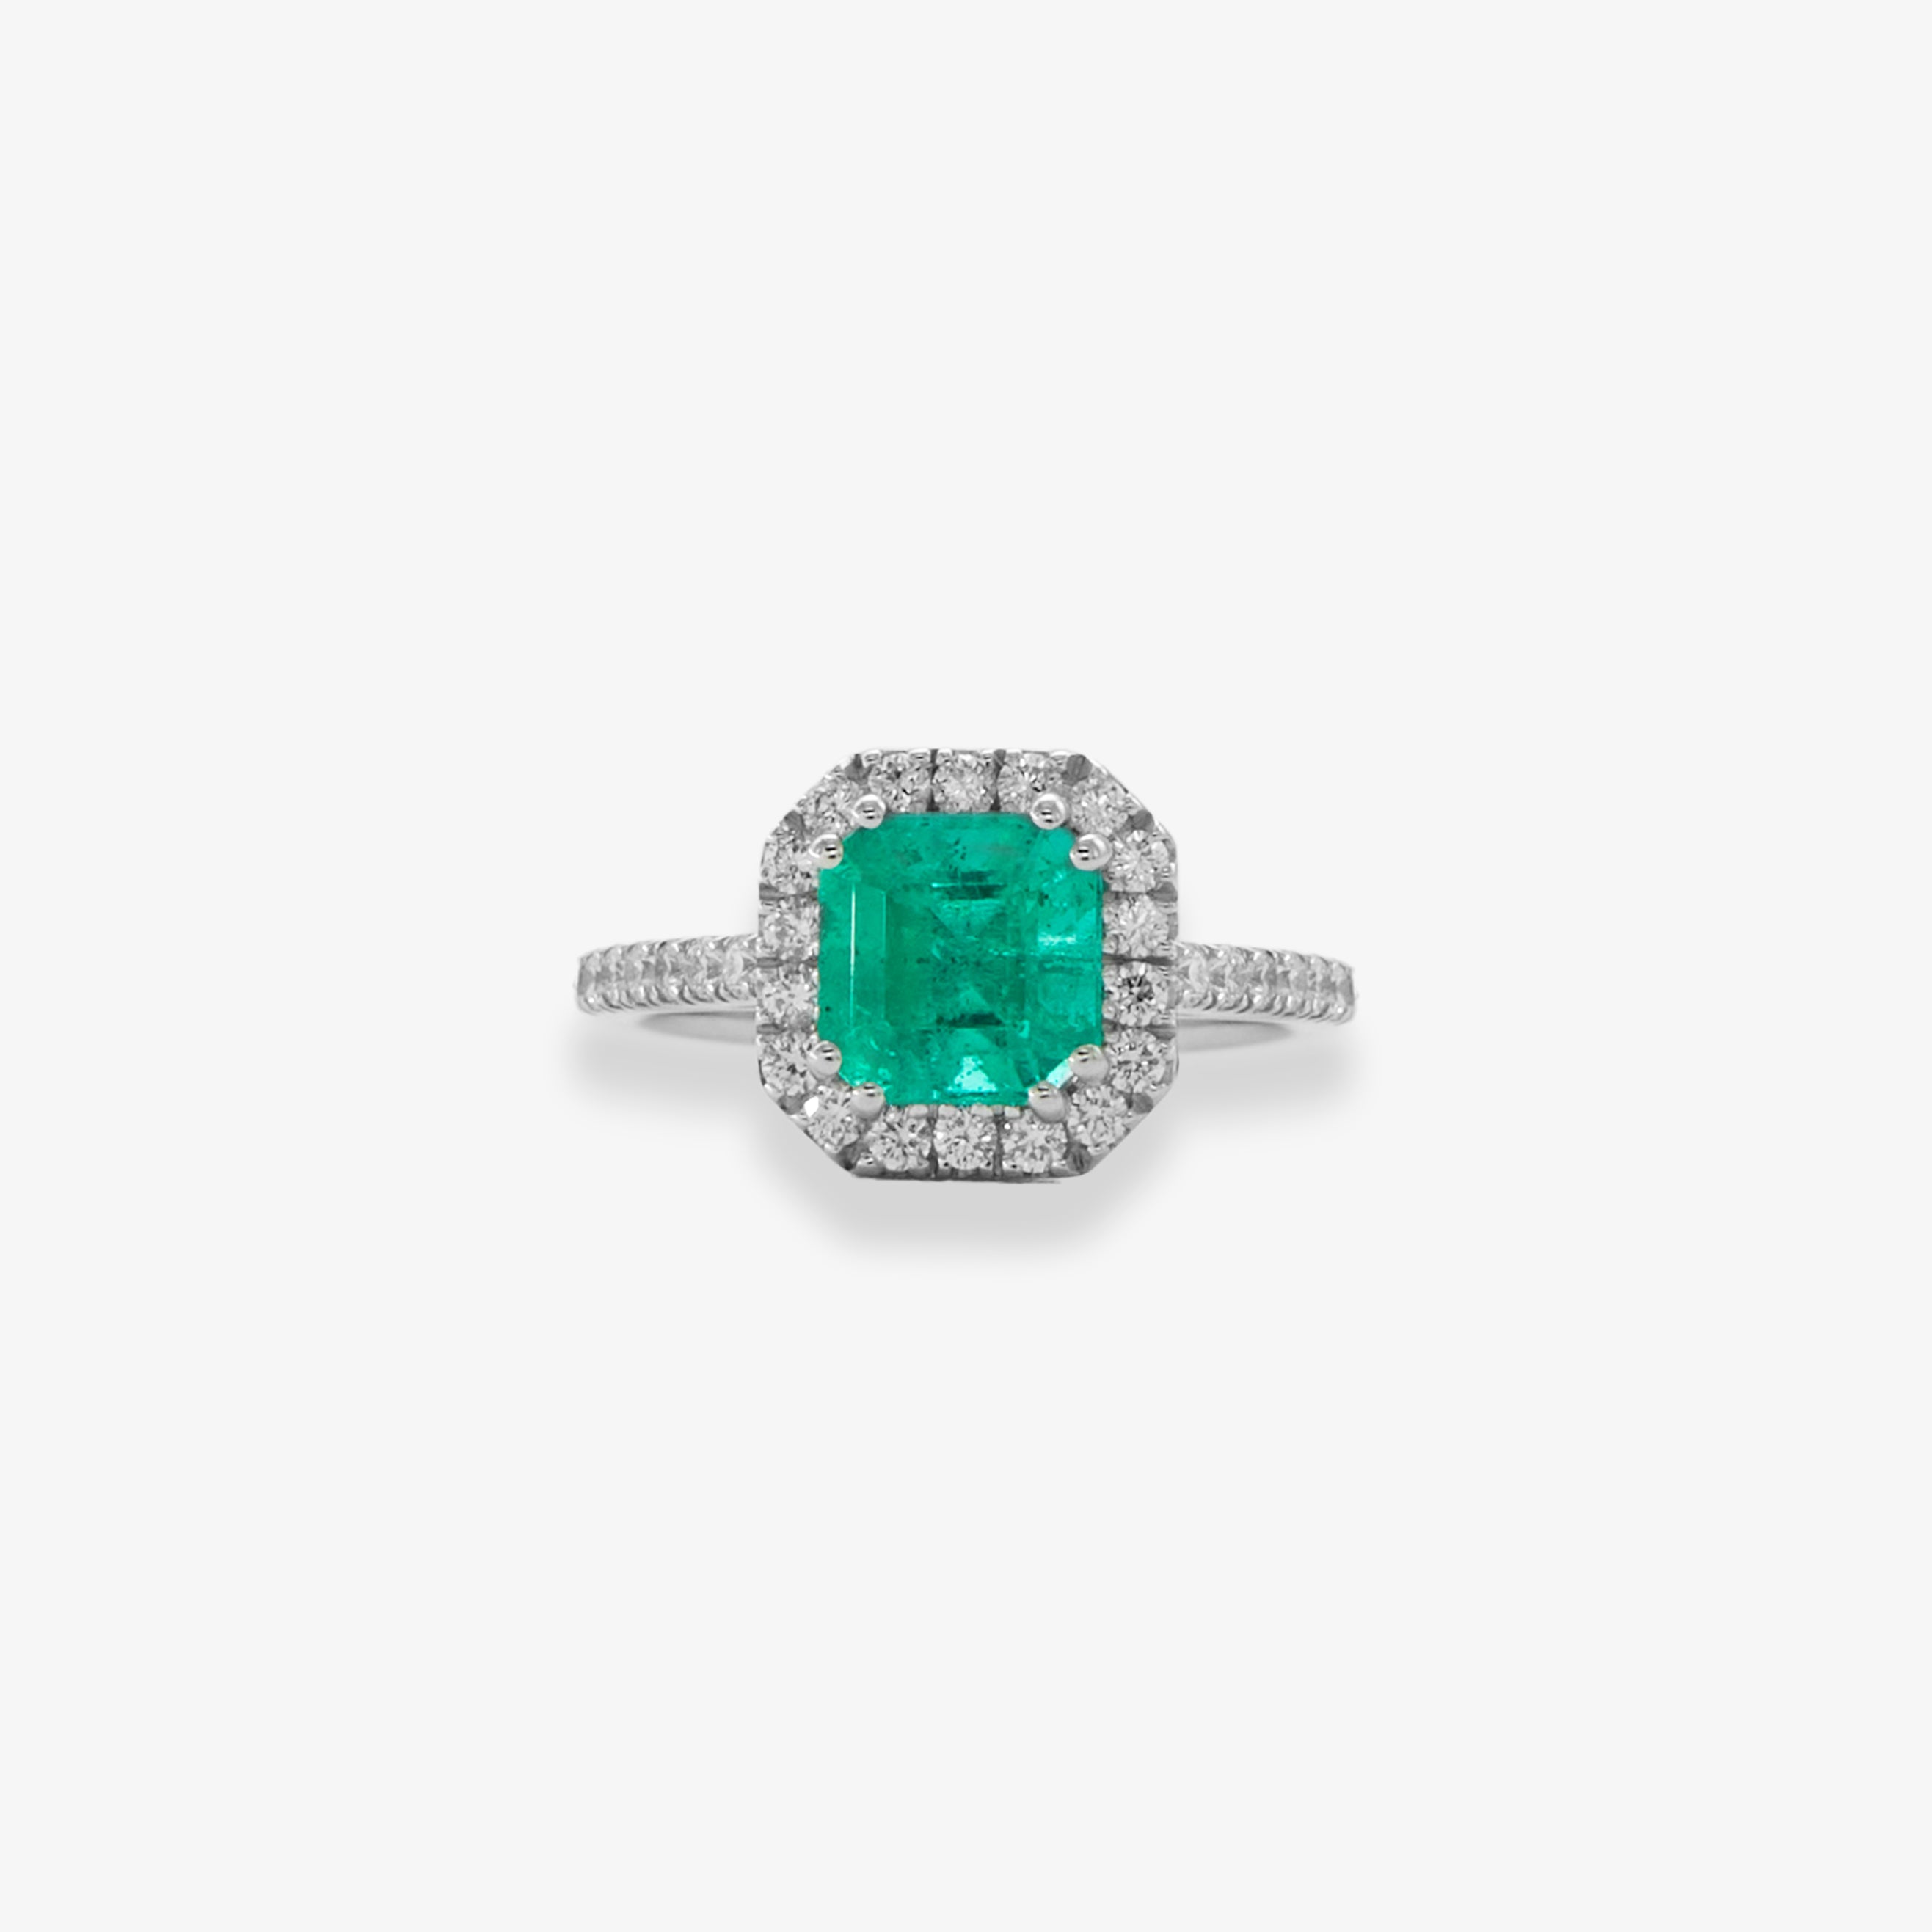 Colombia emerald ring 1.21 ct